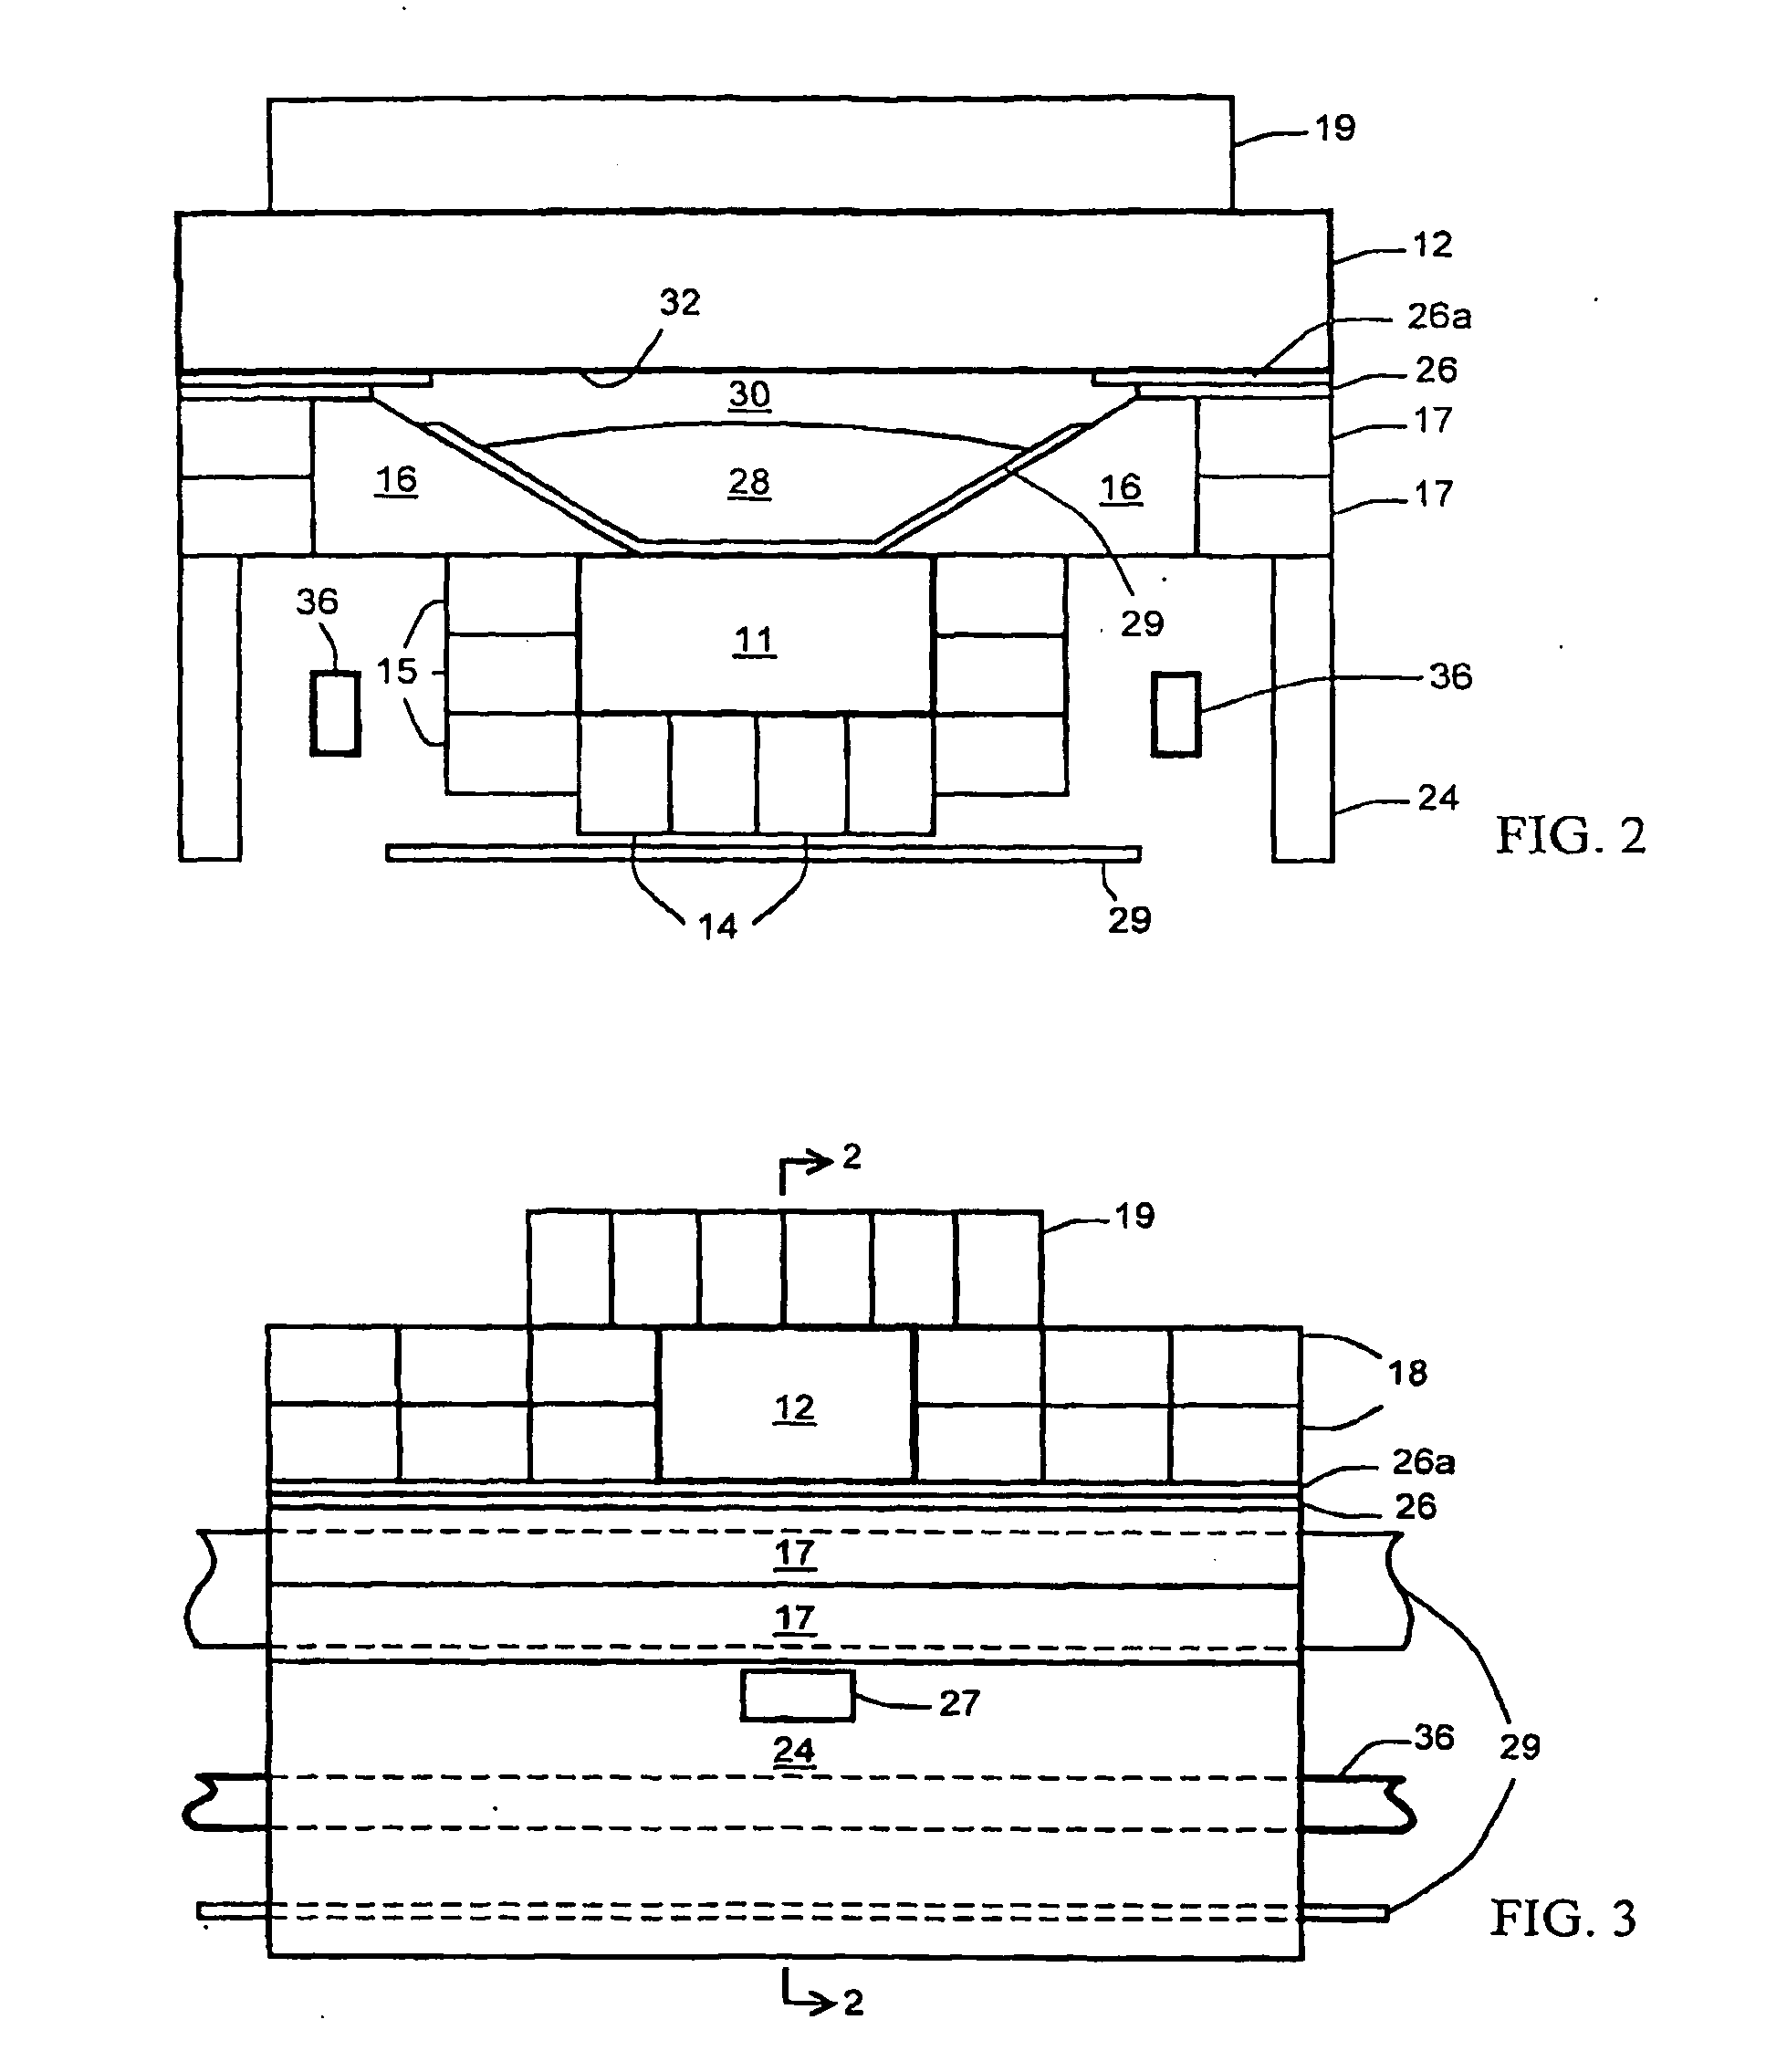 Bulk material analyzer assembly including structural beams containing radiation shielding material